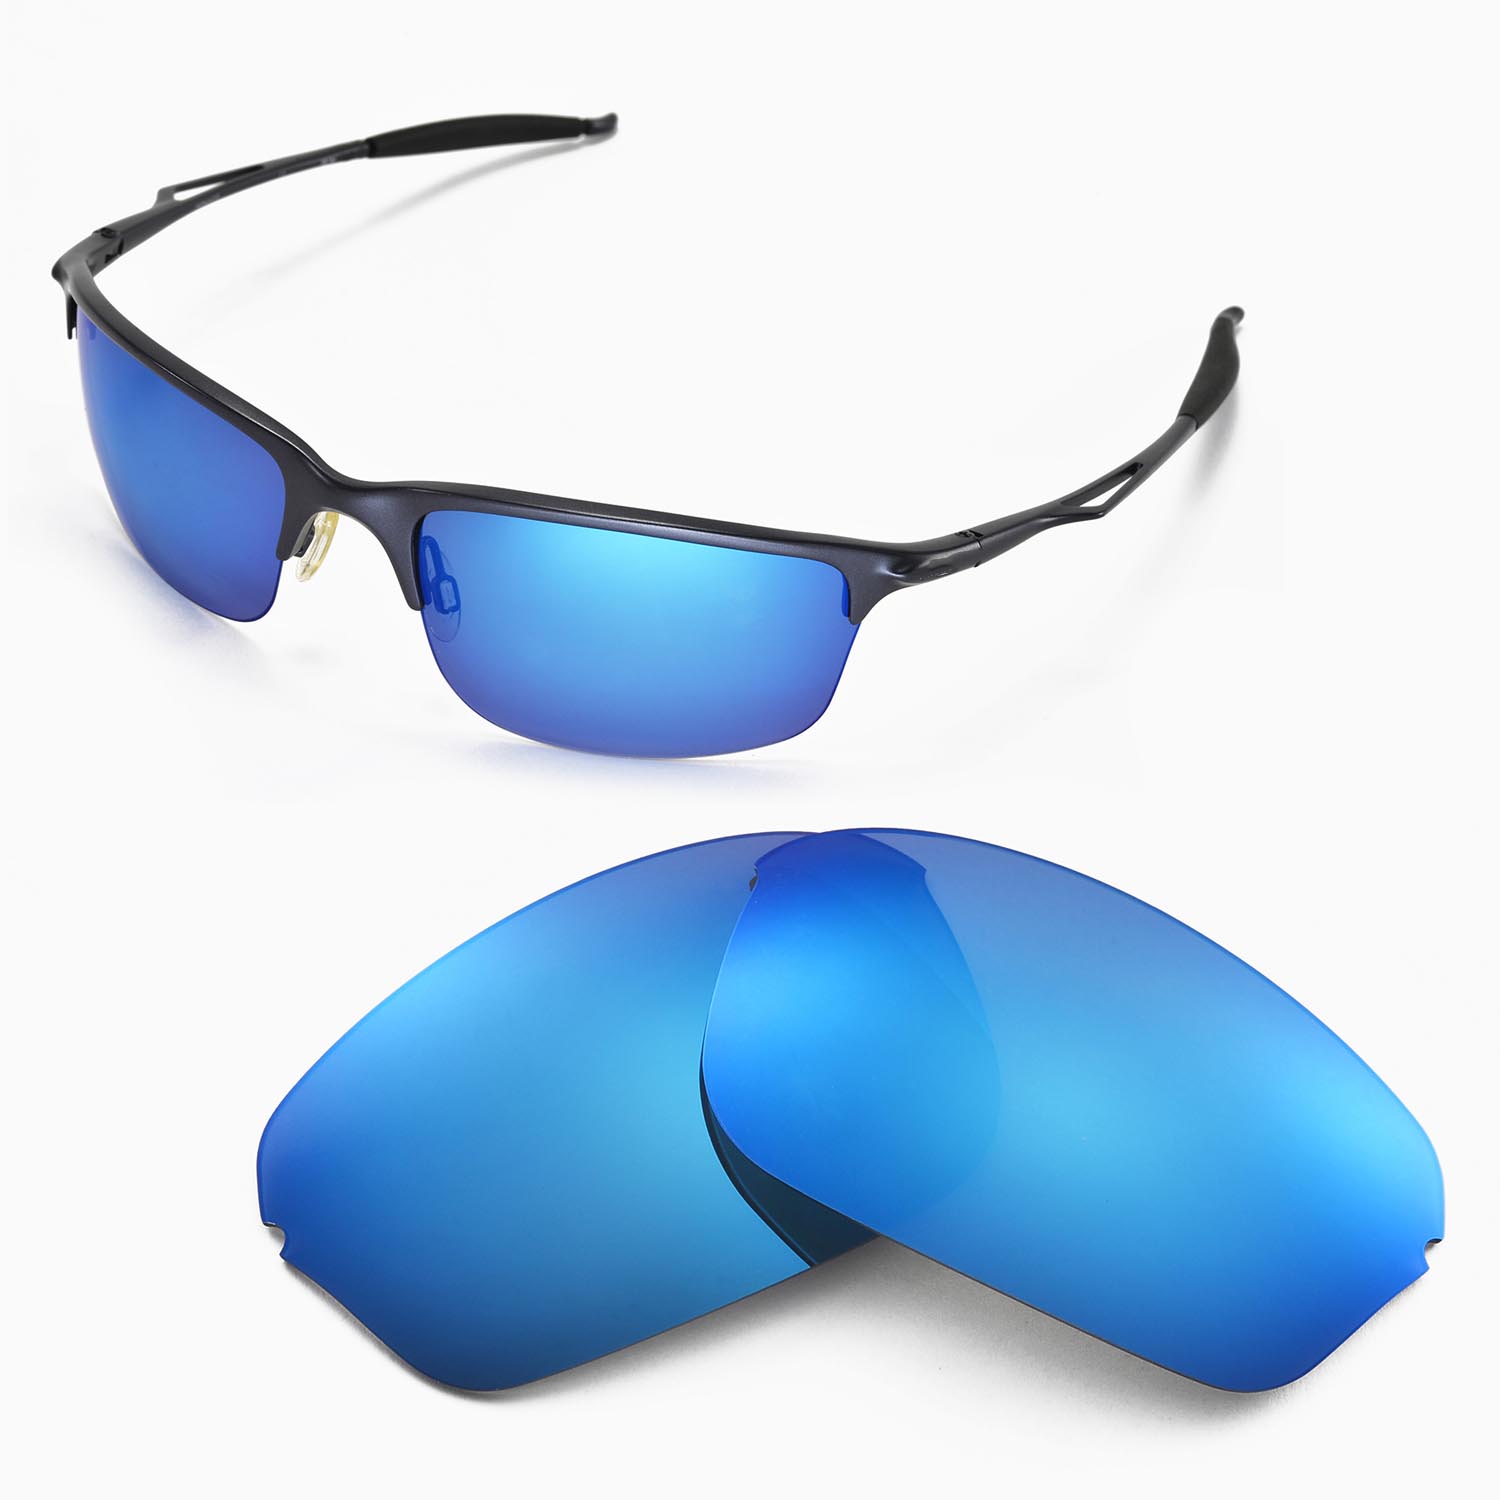 Walleva Ice Blue Polarized Replacement Lenses for Oakley Half Wire 2.0 Sunglasses - image 1 of 6